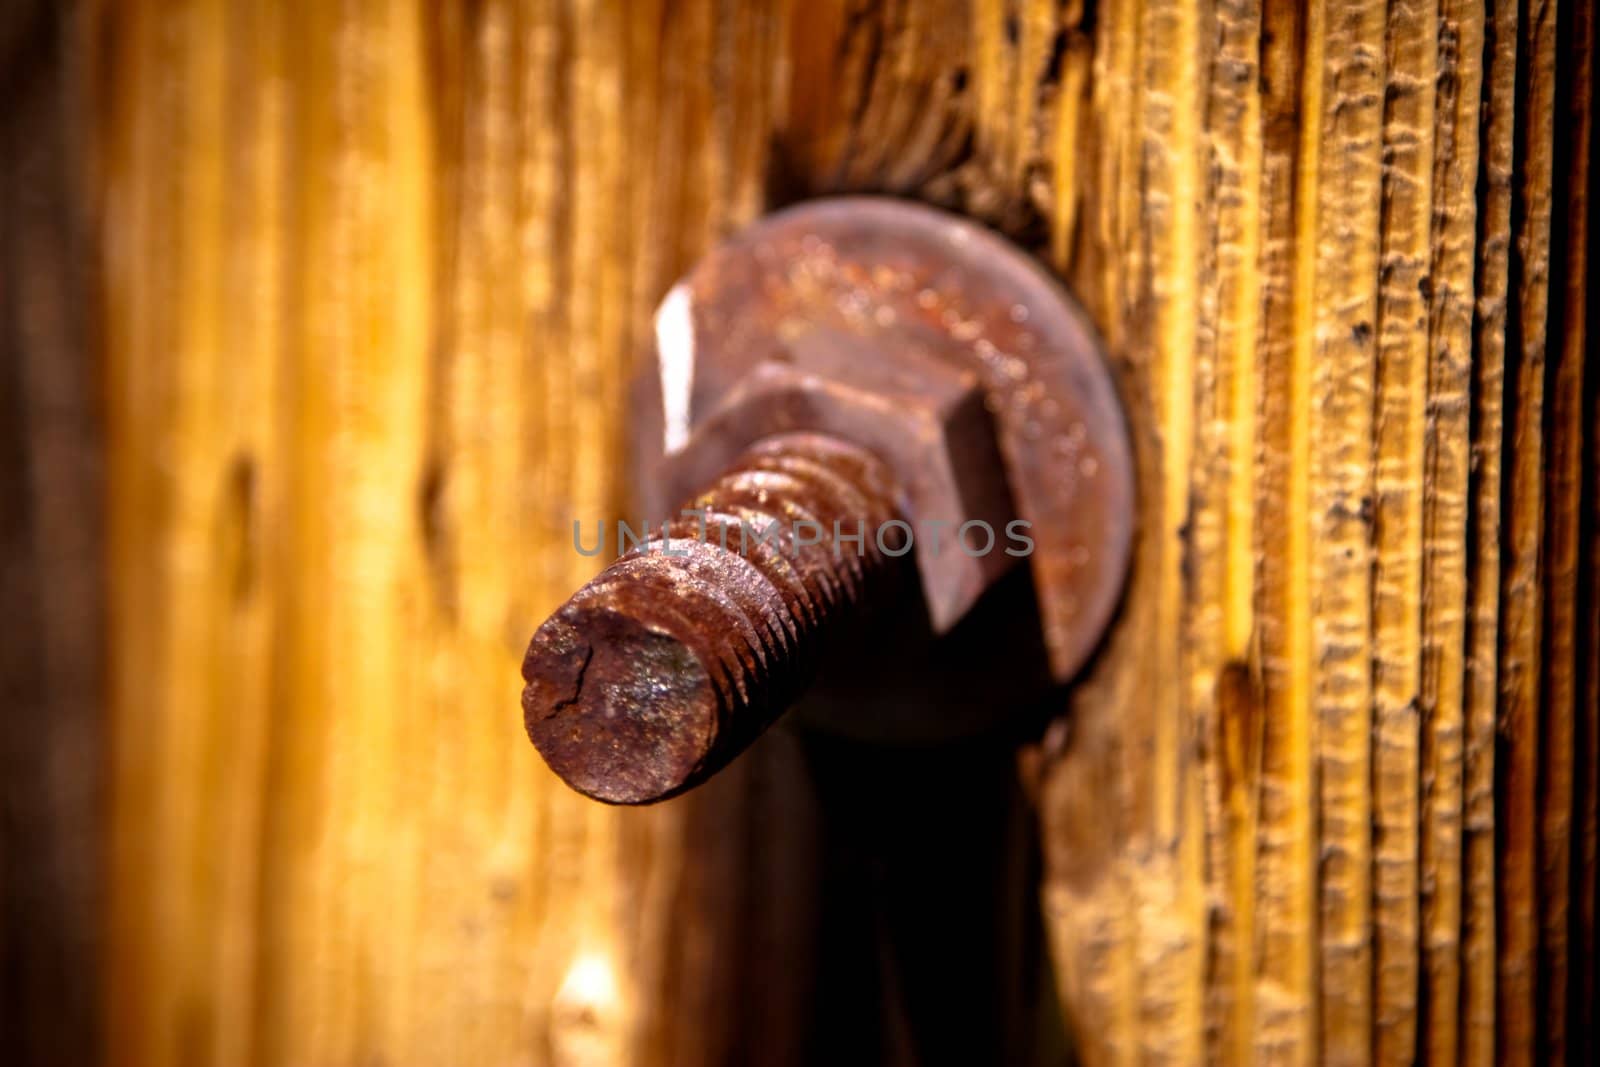 Rusty bolt by timscottrom